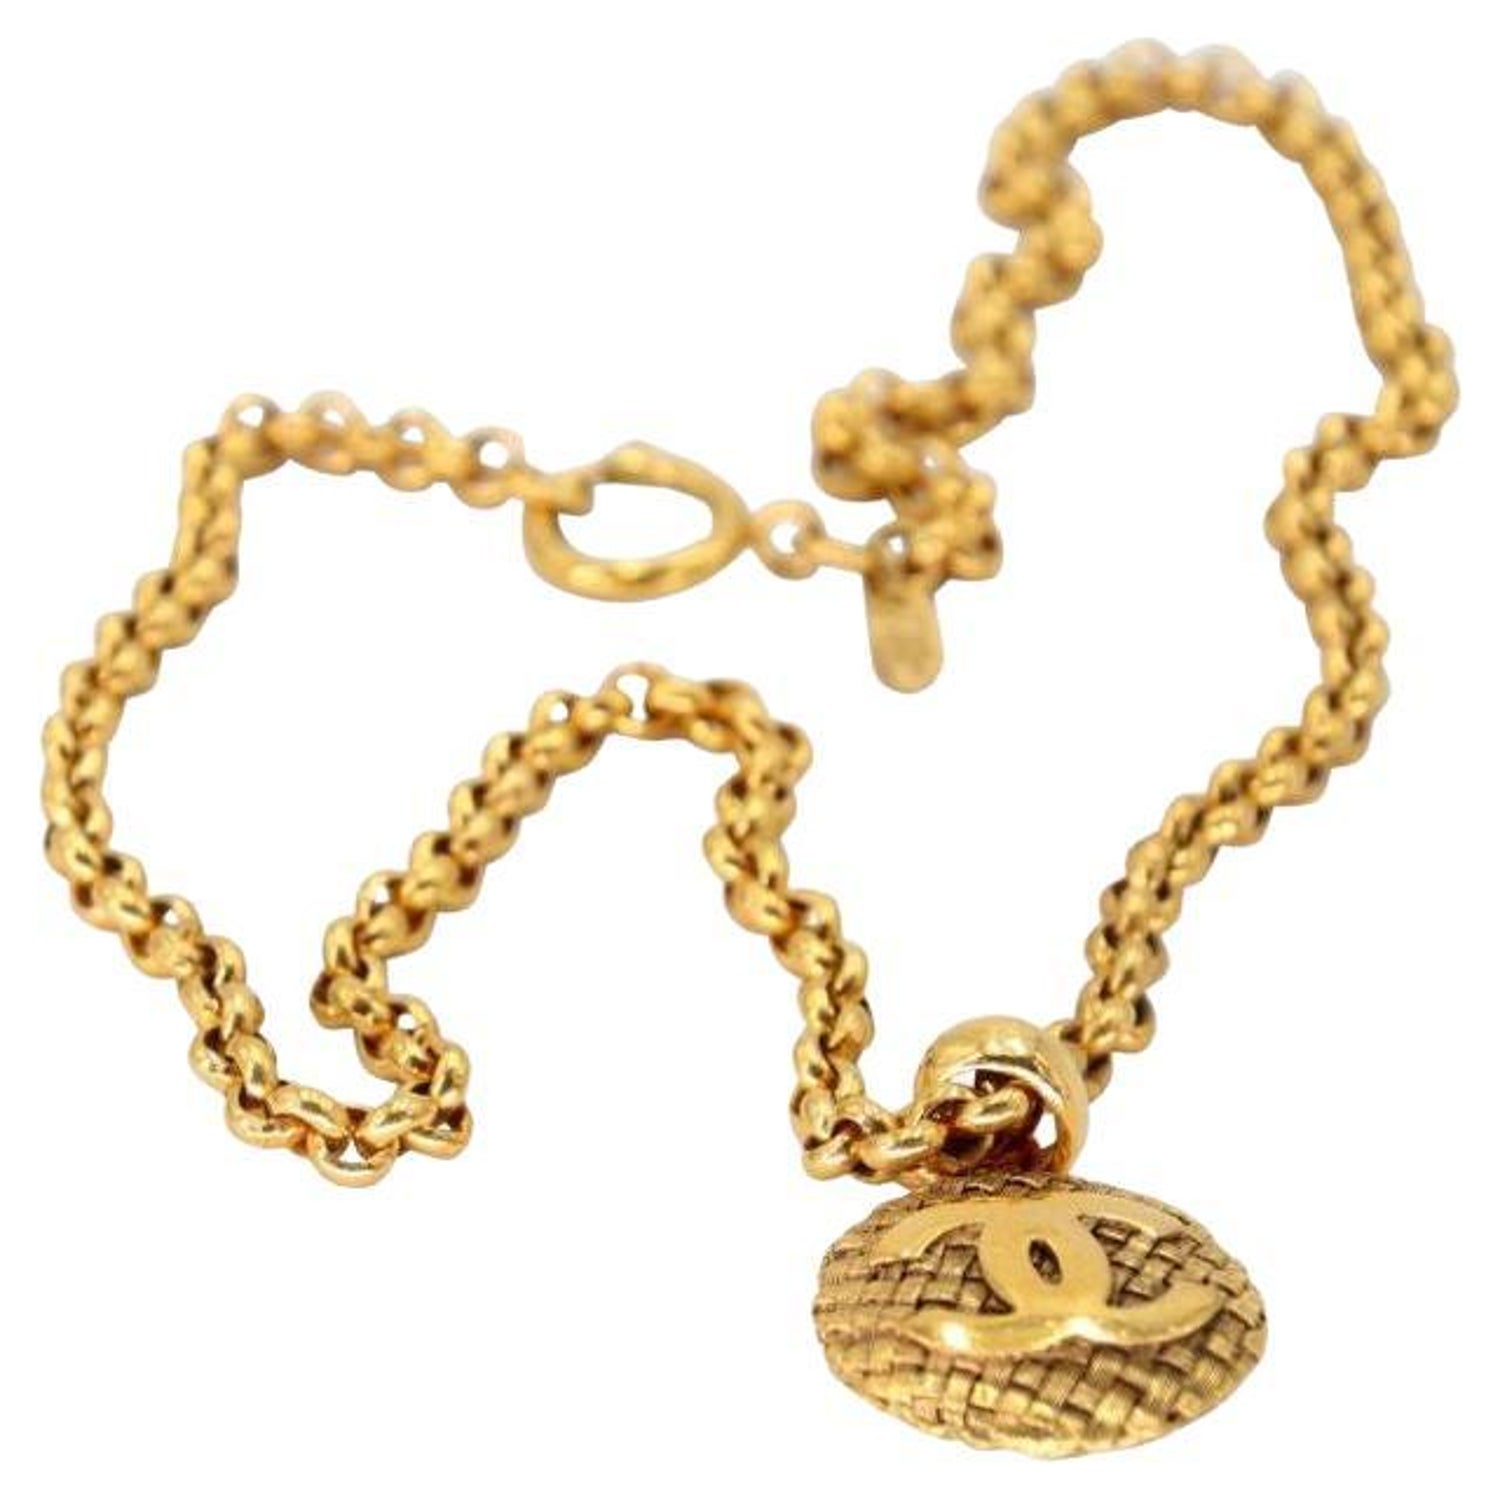 Sold at Auction: Vintage Chanel gold tone mirror pendant charm necklace  with CC Logo and chunky chain, tag marked 2 CC 9 Made in France, in Chanel  bo